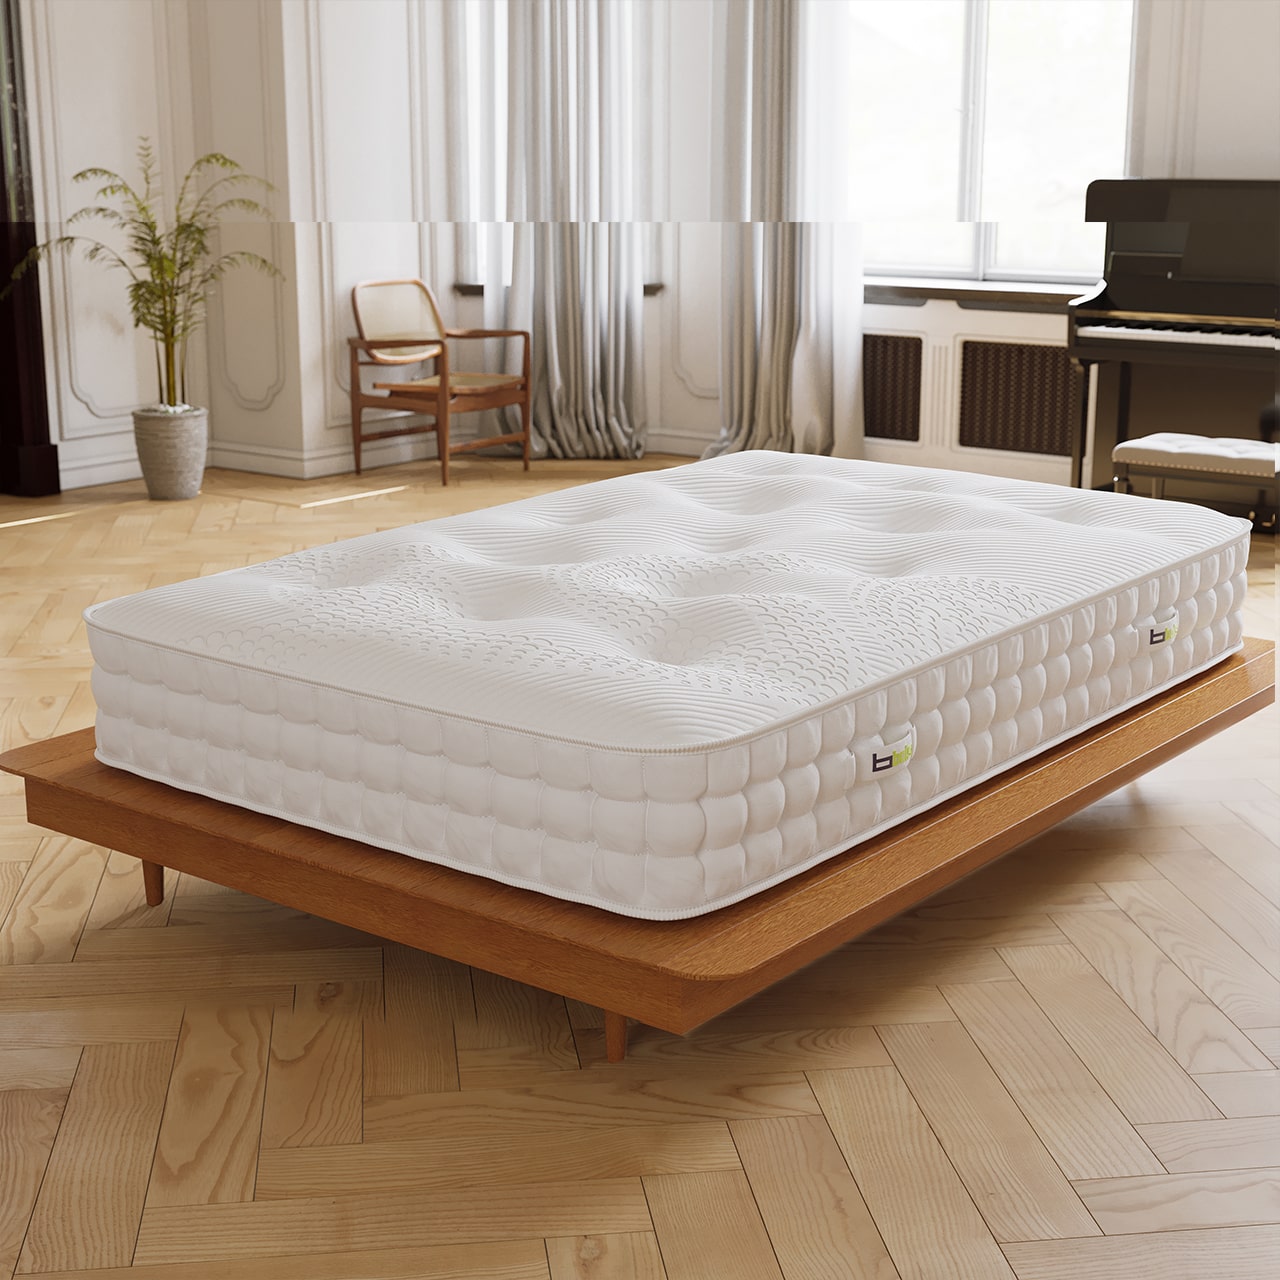 Balsa mattress for two and one person, Majesty model